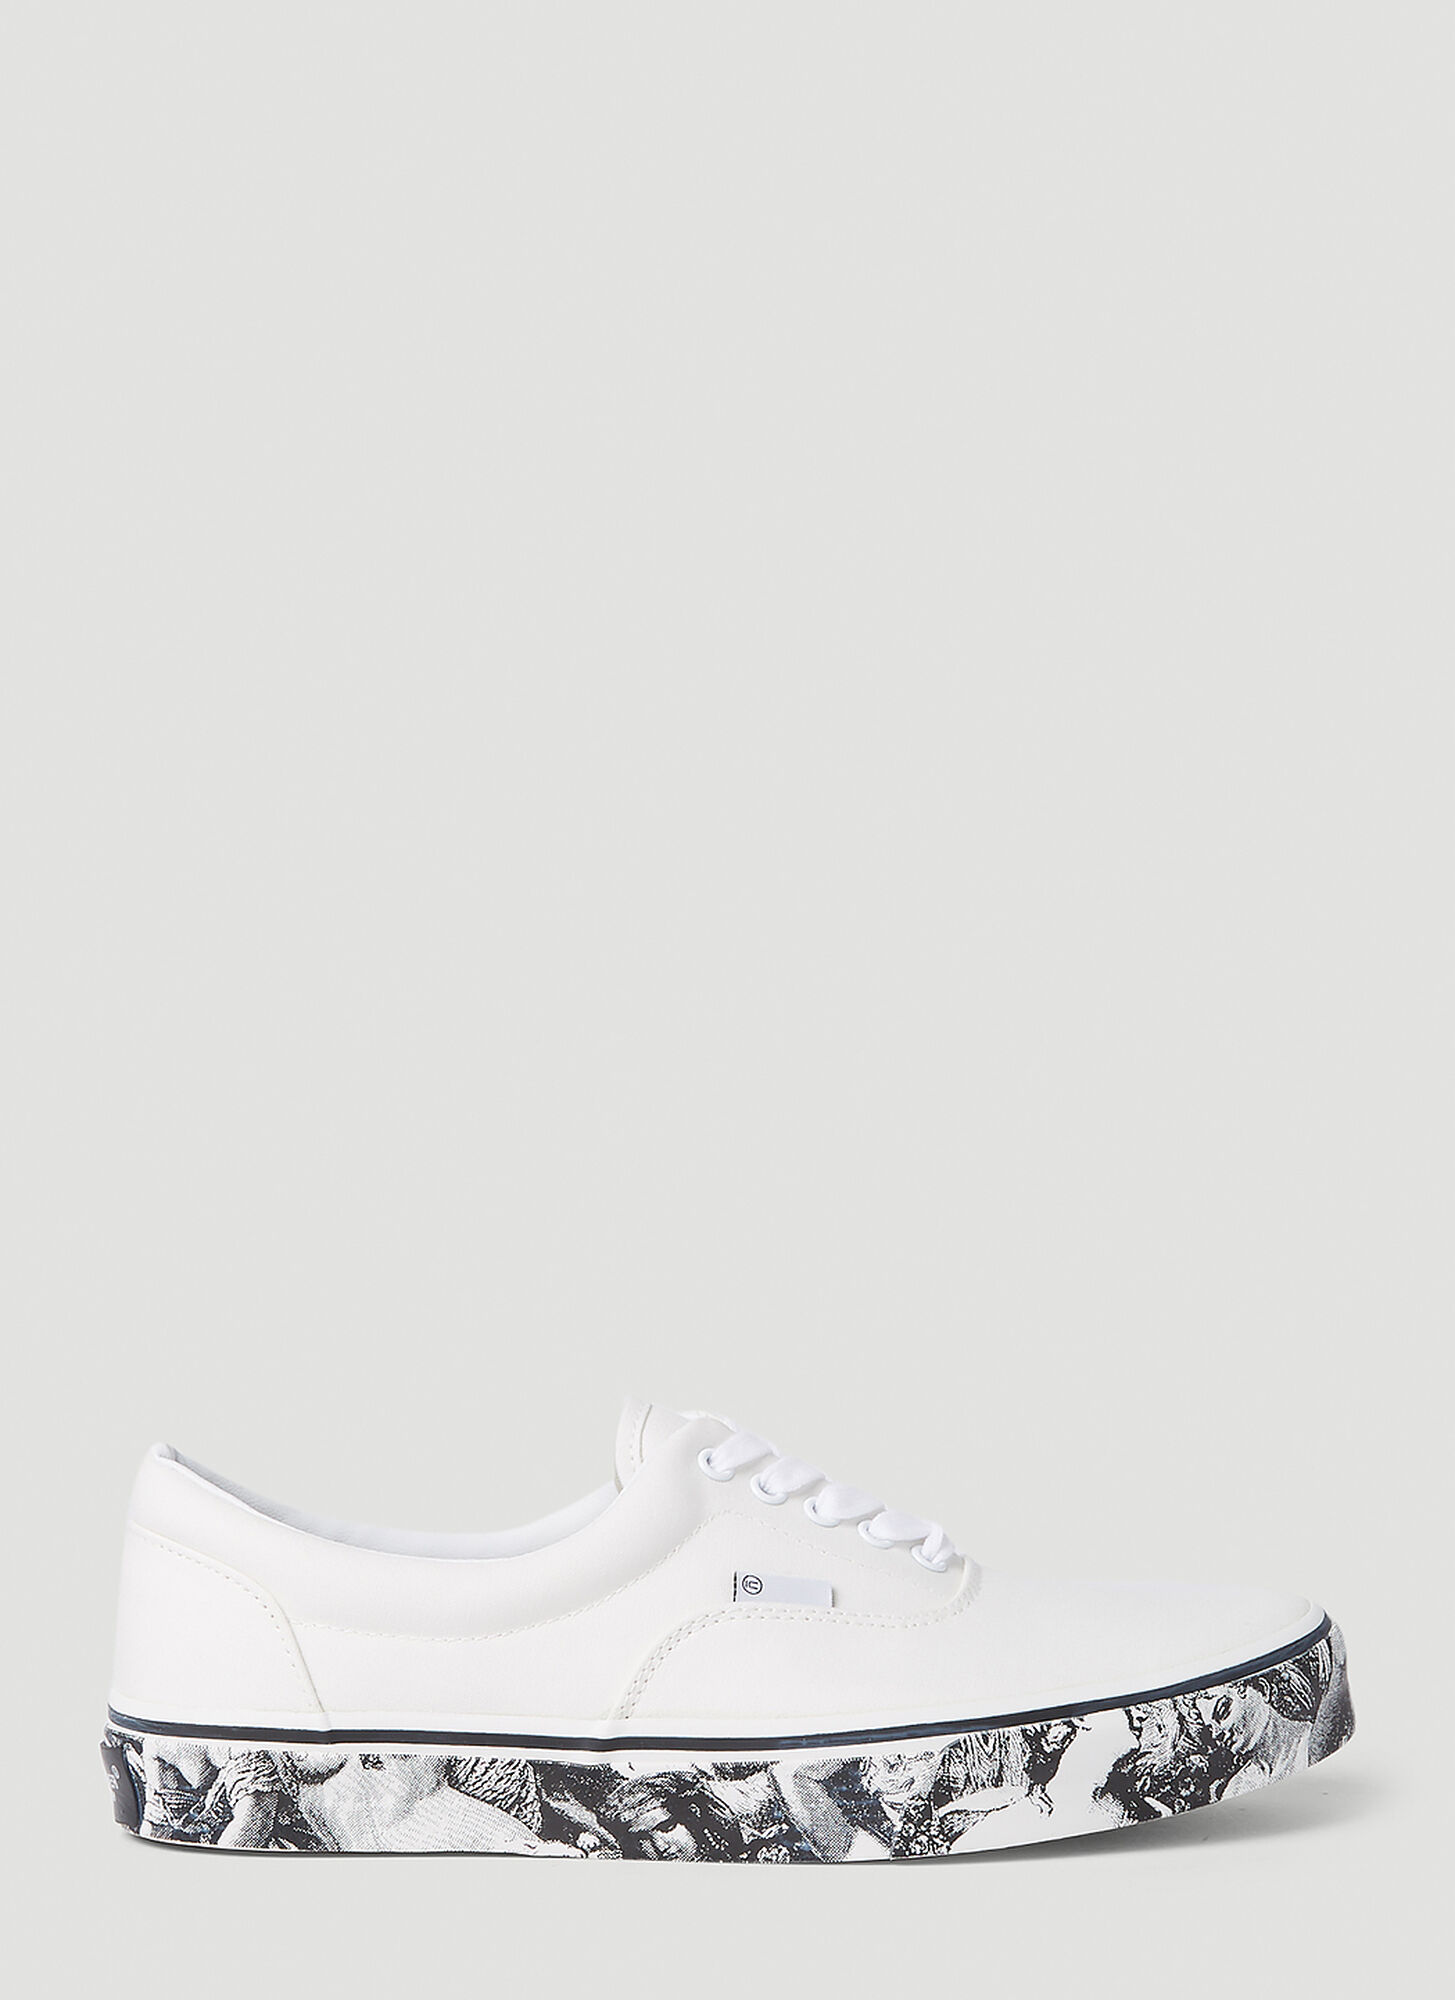 Undercover Graphic Sole Sneakers In White